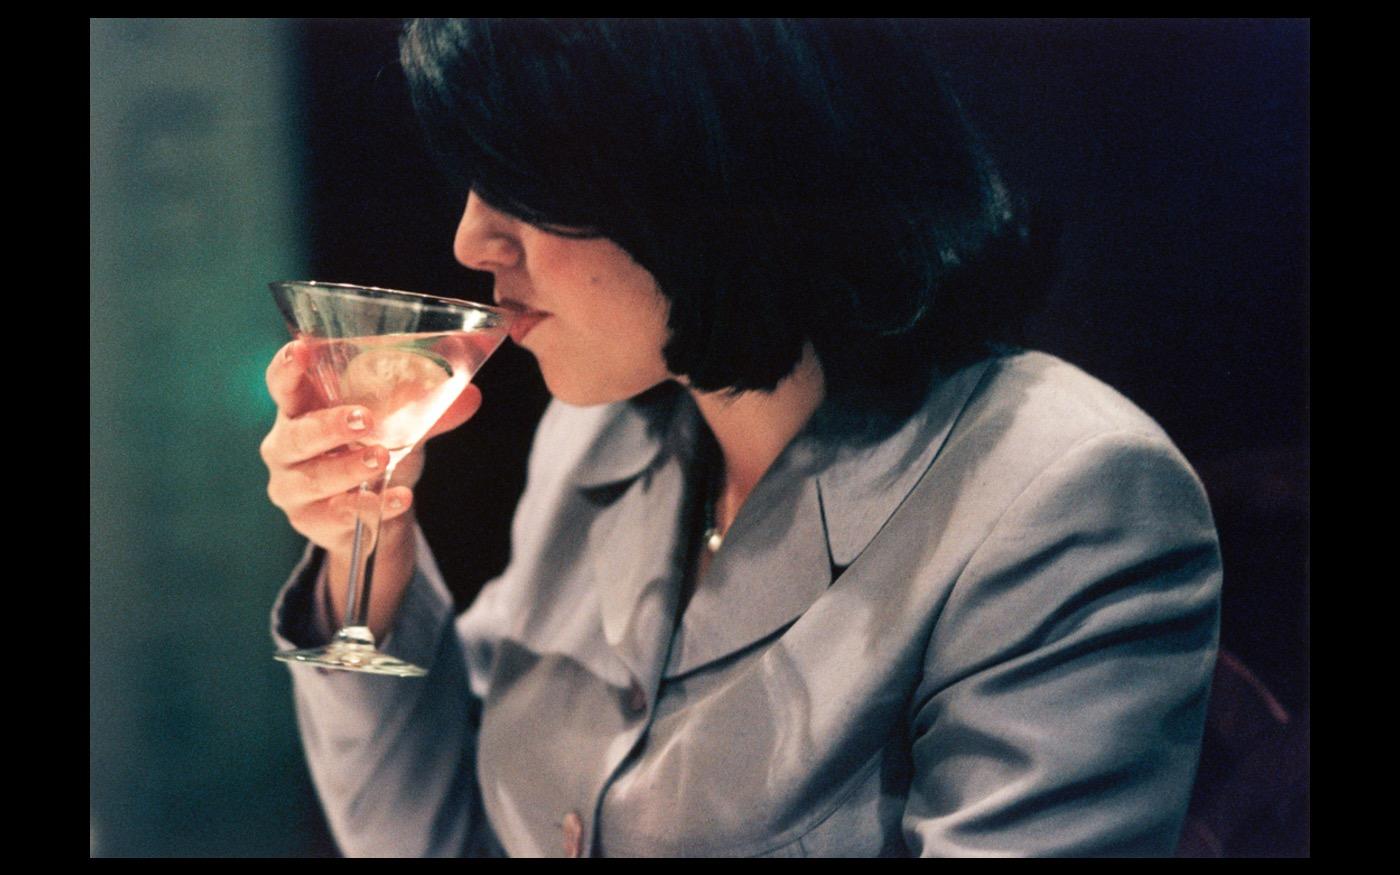 Former White House intern Monica Lewinsky sips a cosmo at Mortons/DC following the explosive news of her affiar with Bill Clinton 1998 : Looking Back: 60 Years of Photographs : David Burnett | Photographer